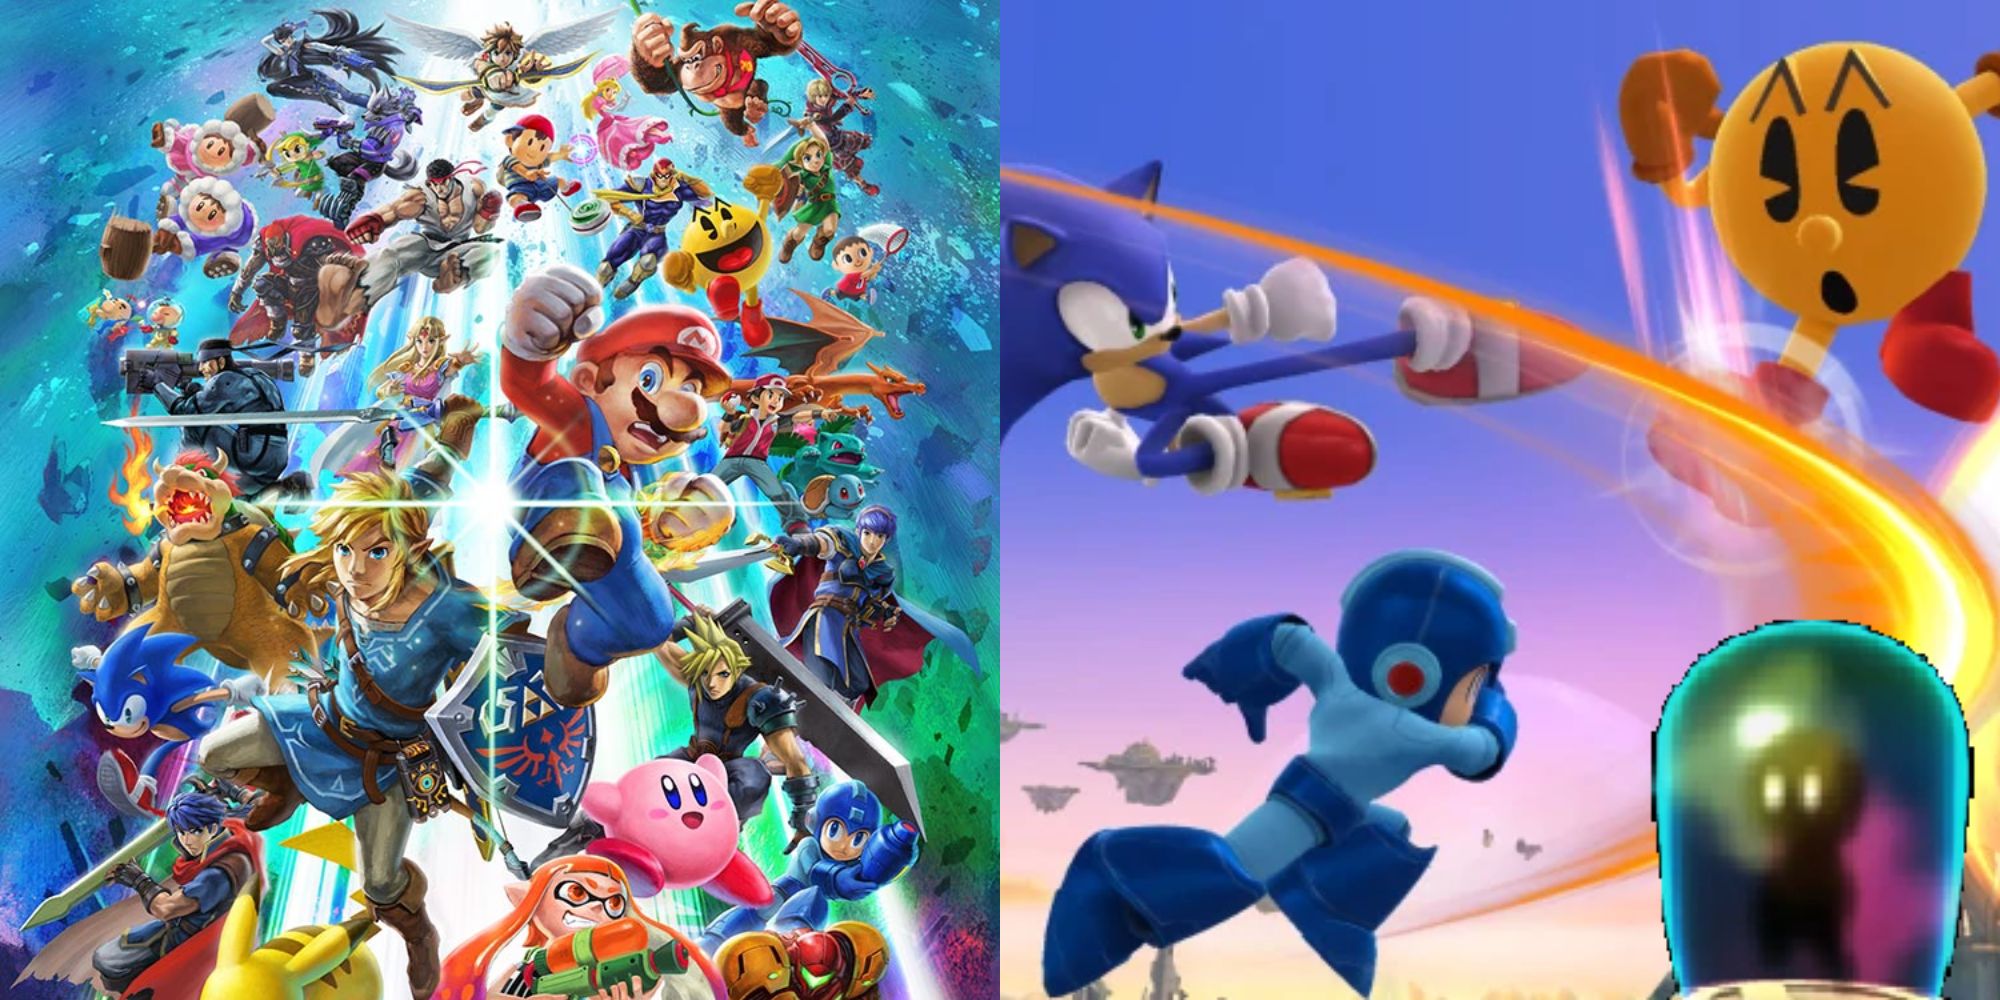 Split image showing the cover of Super Smash Bros. and Sonic, Megaman, and Pacman fighting.